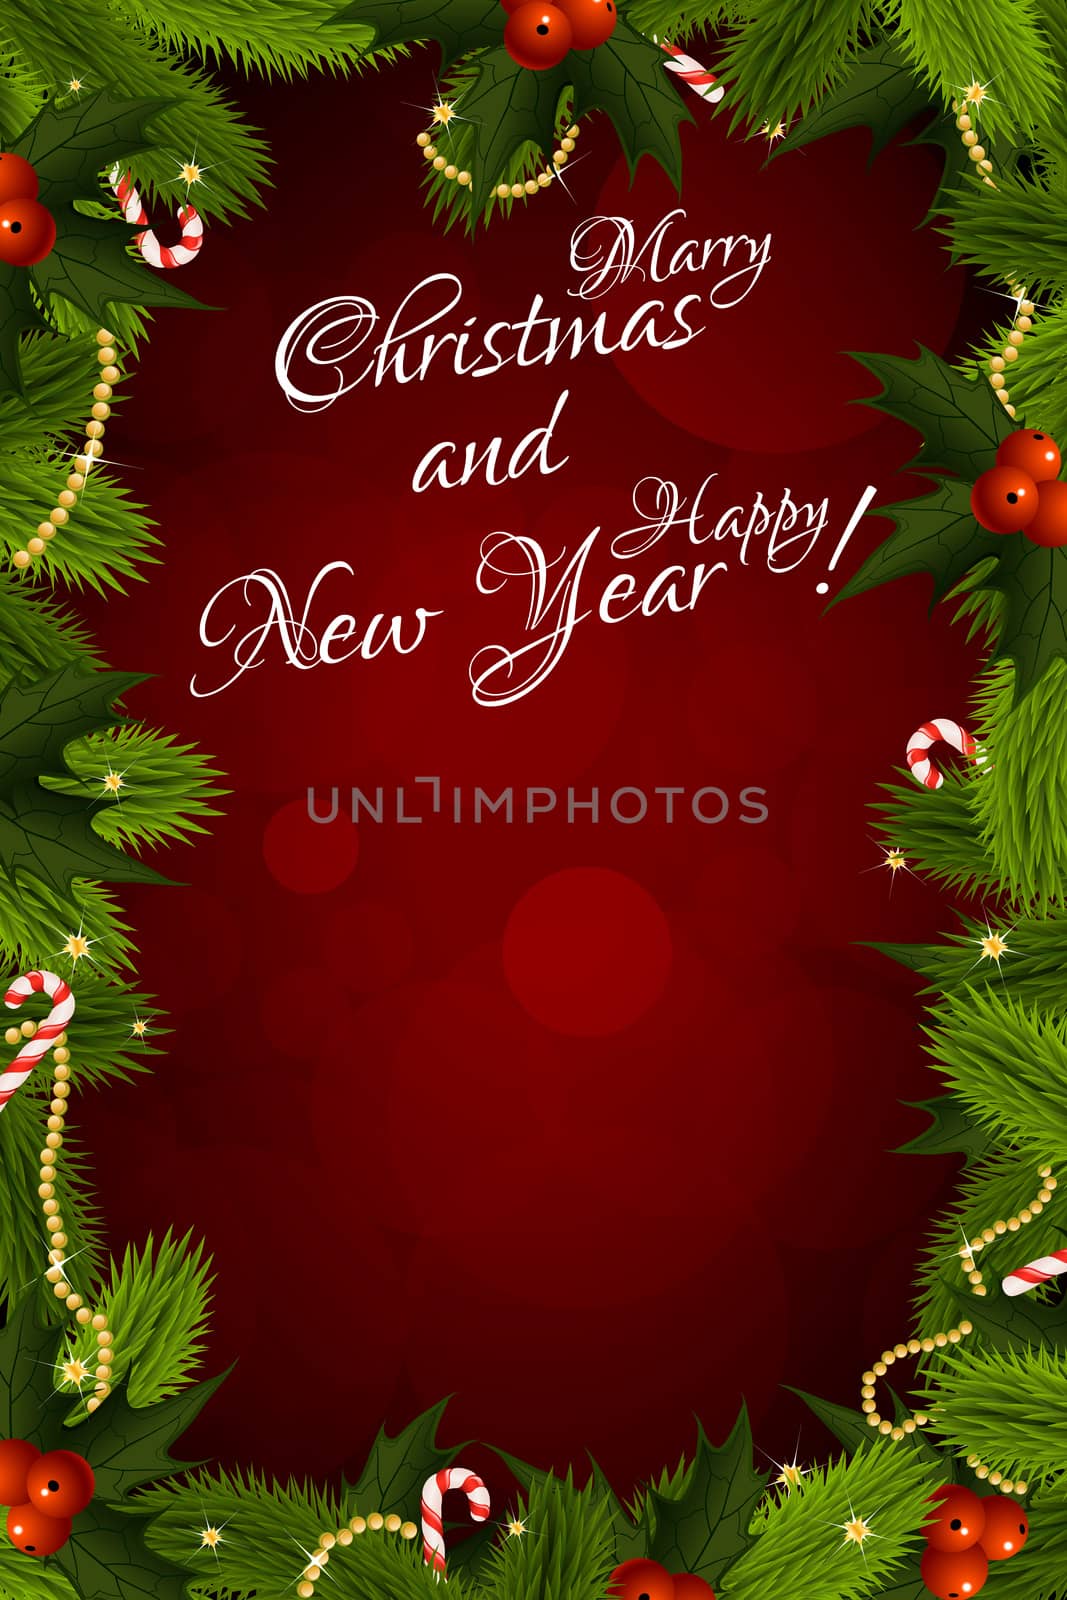 Abstract Christmas Card with Message "Merry Christmas and Happy New Year!"